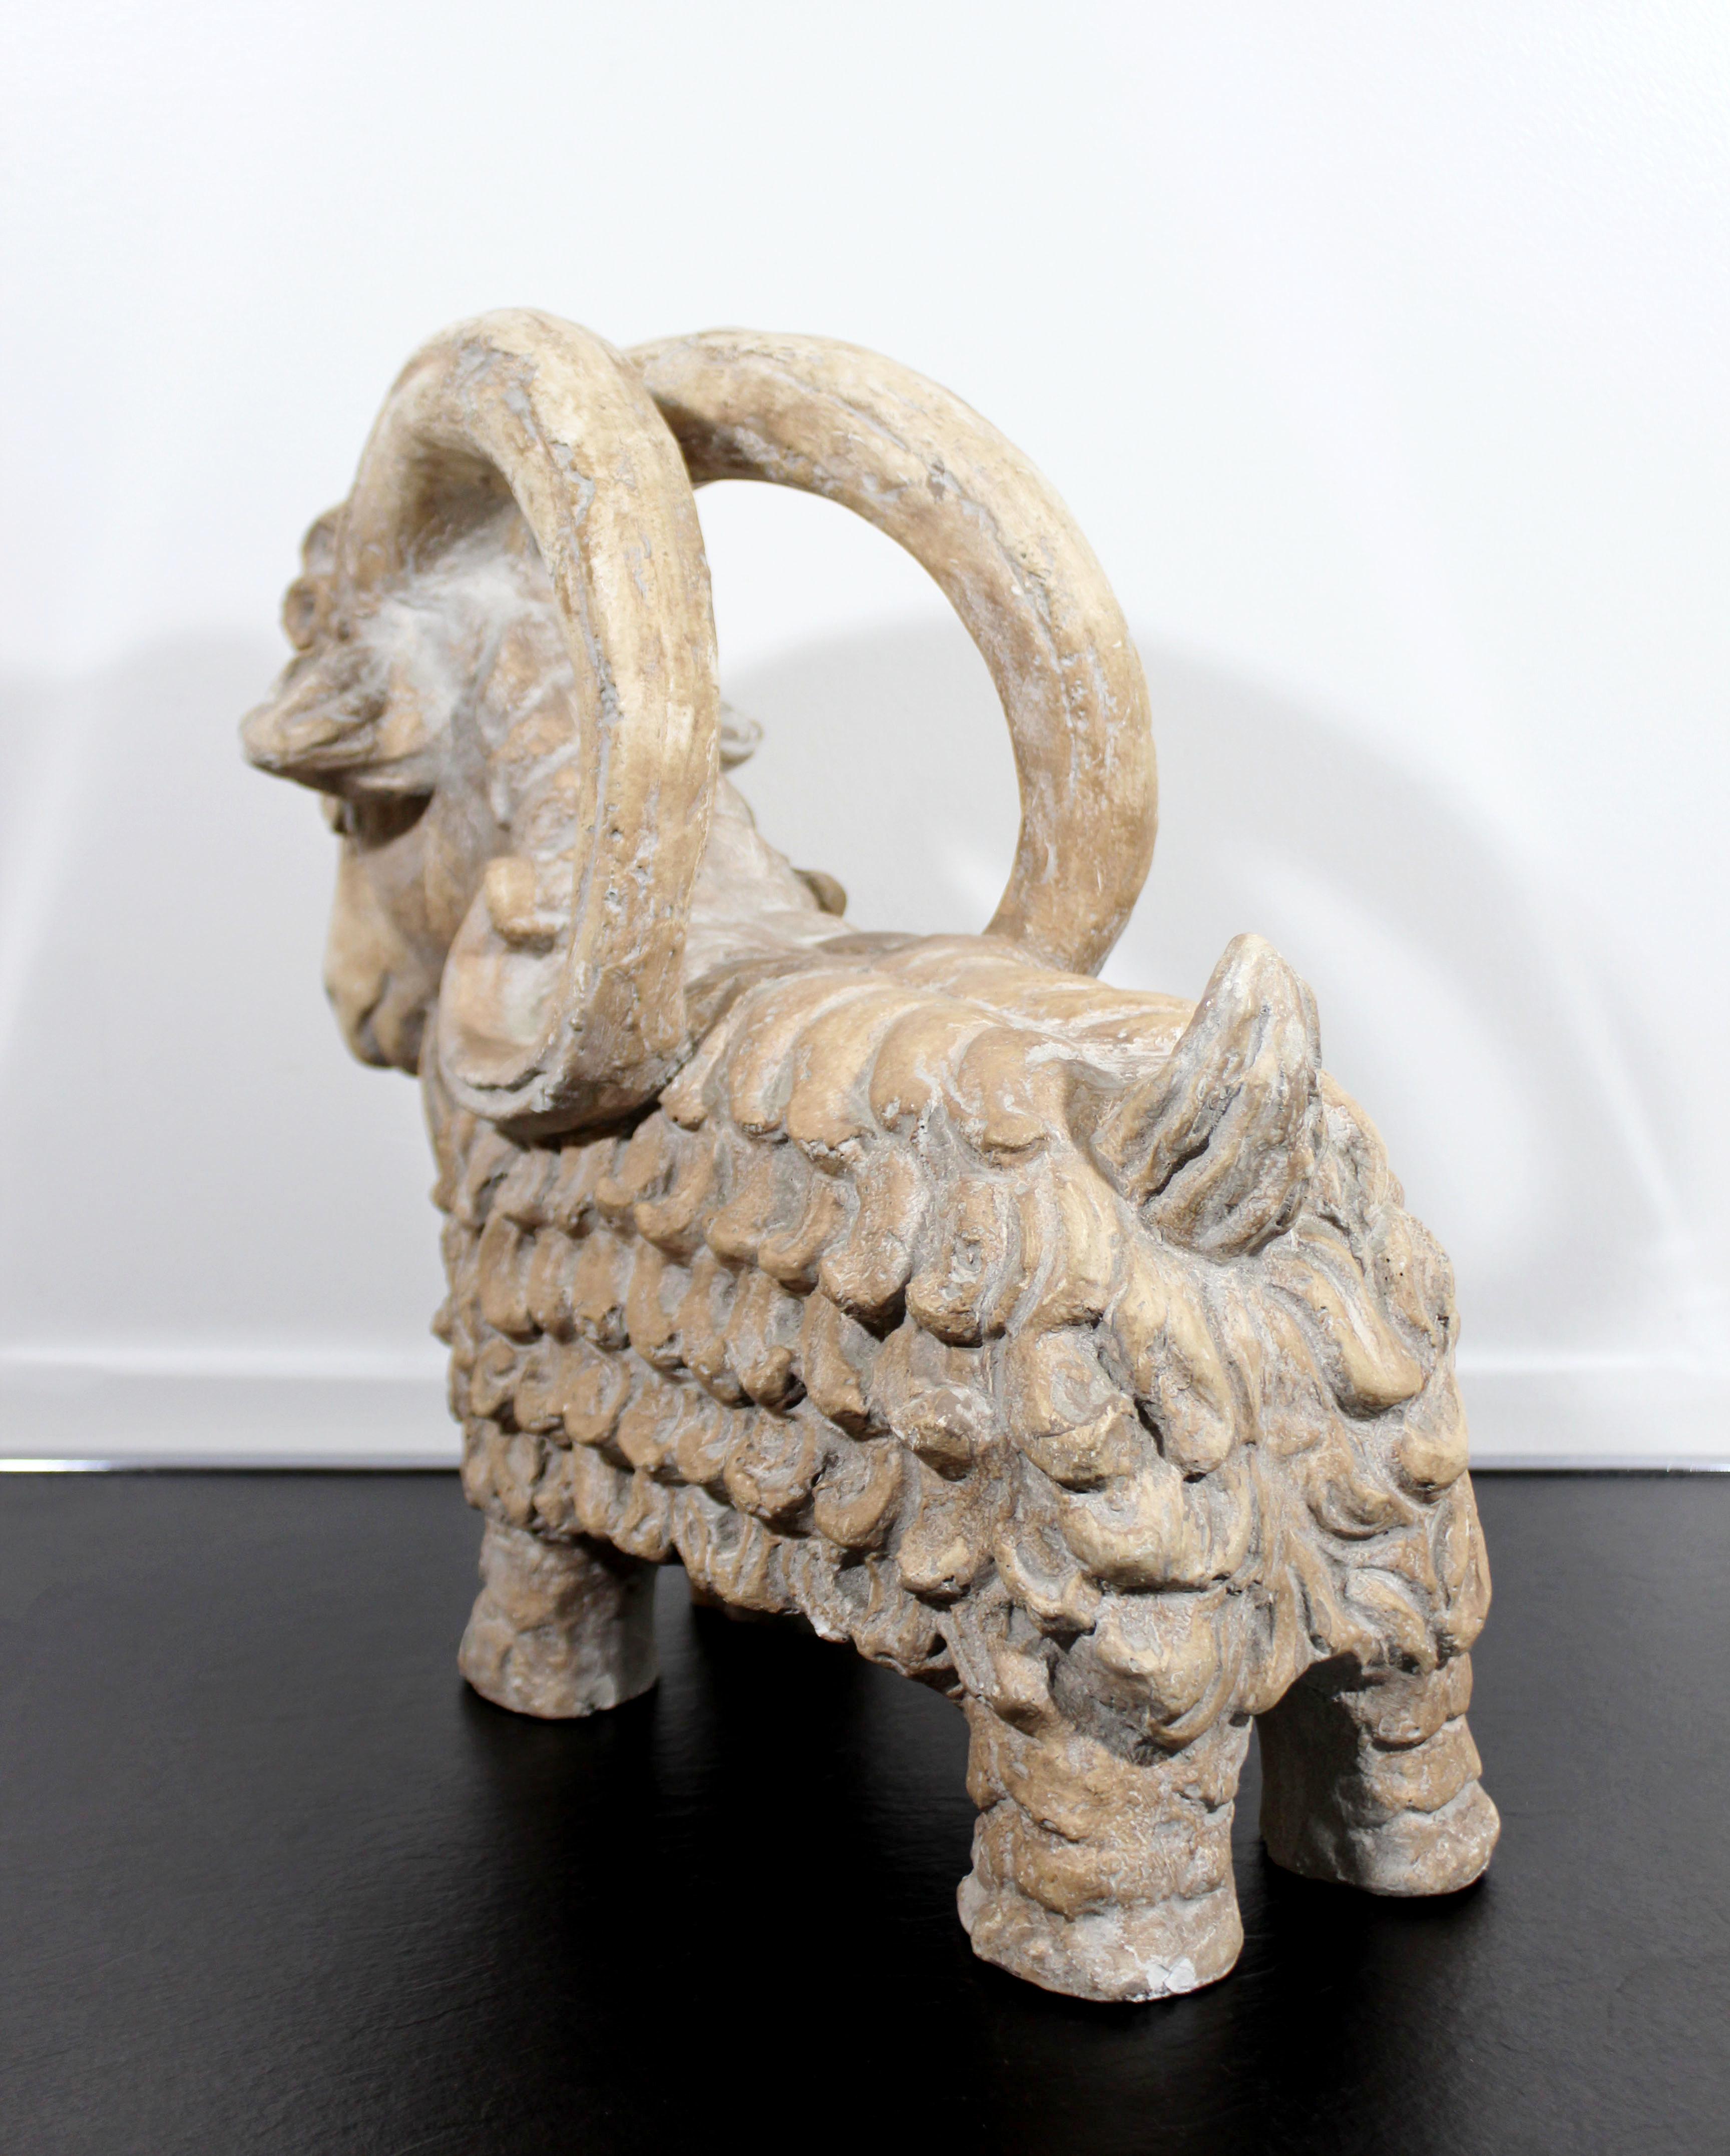 American Mid-Century Modern Rare Austin Production Signed Aries Ram Table Sculpture, 1971